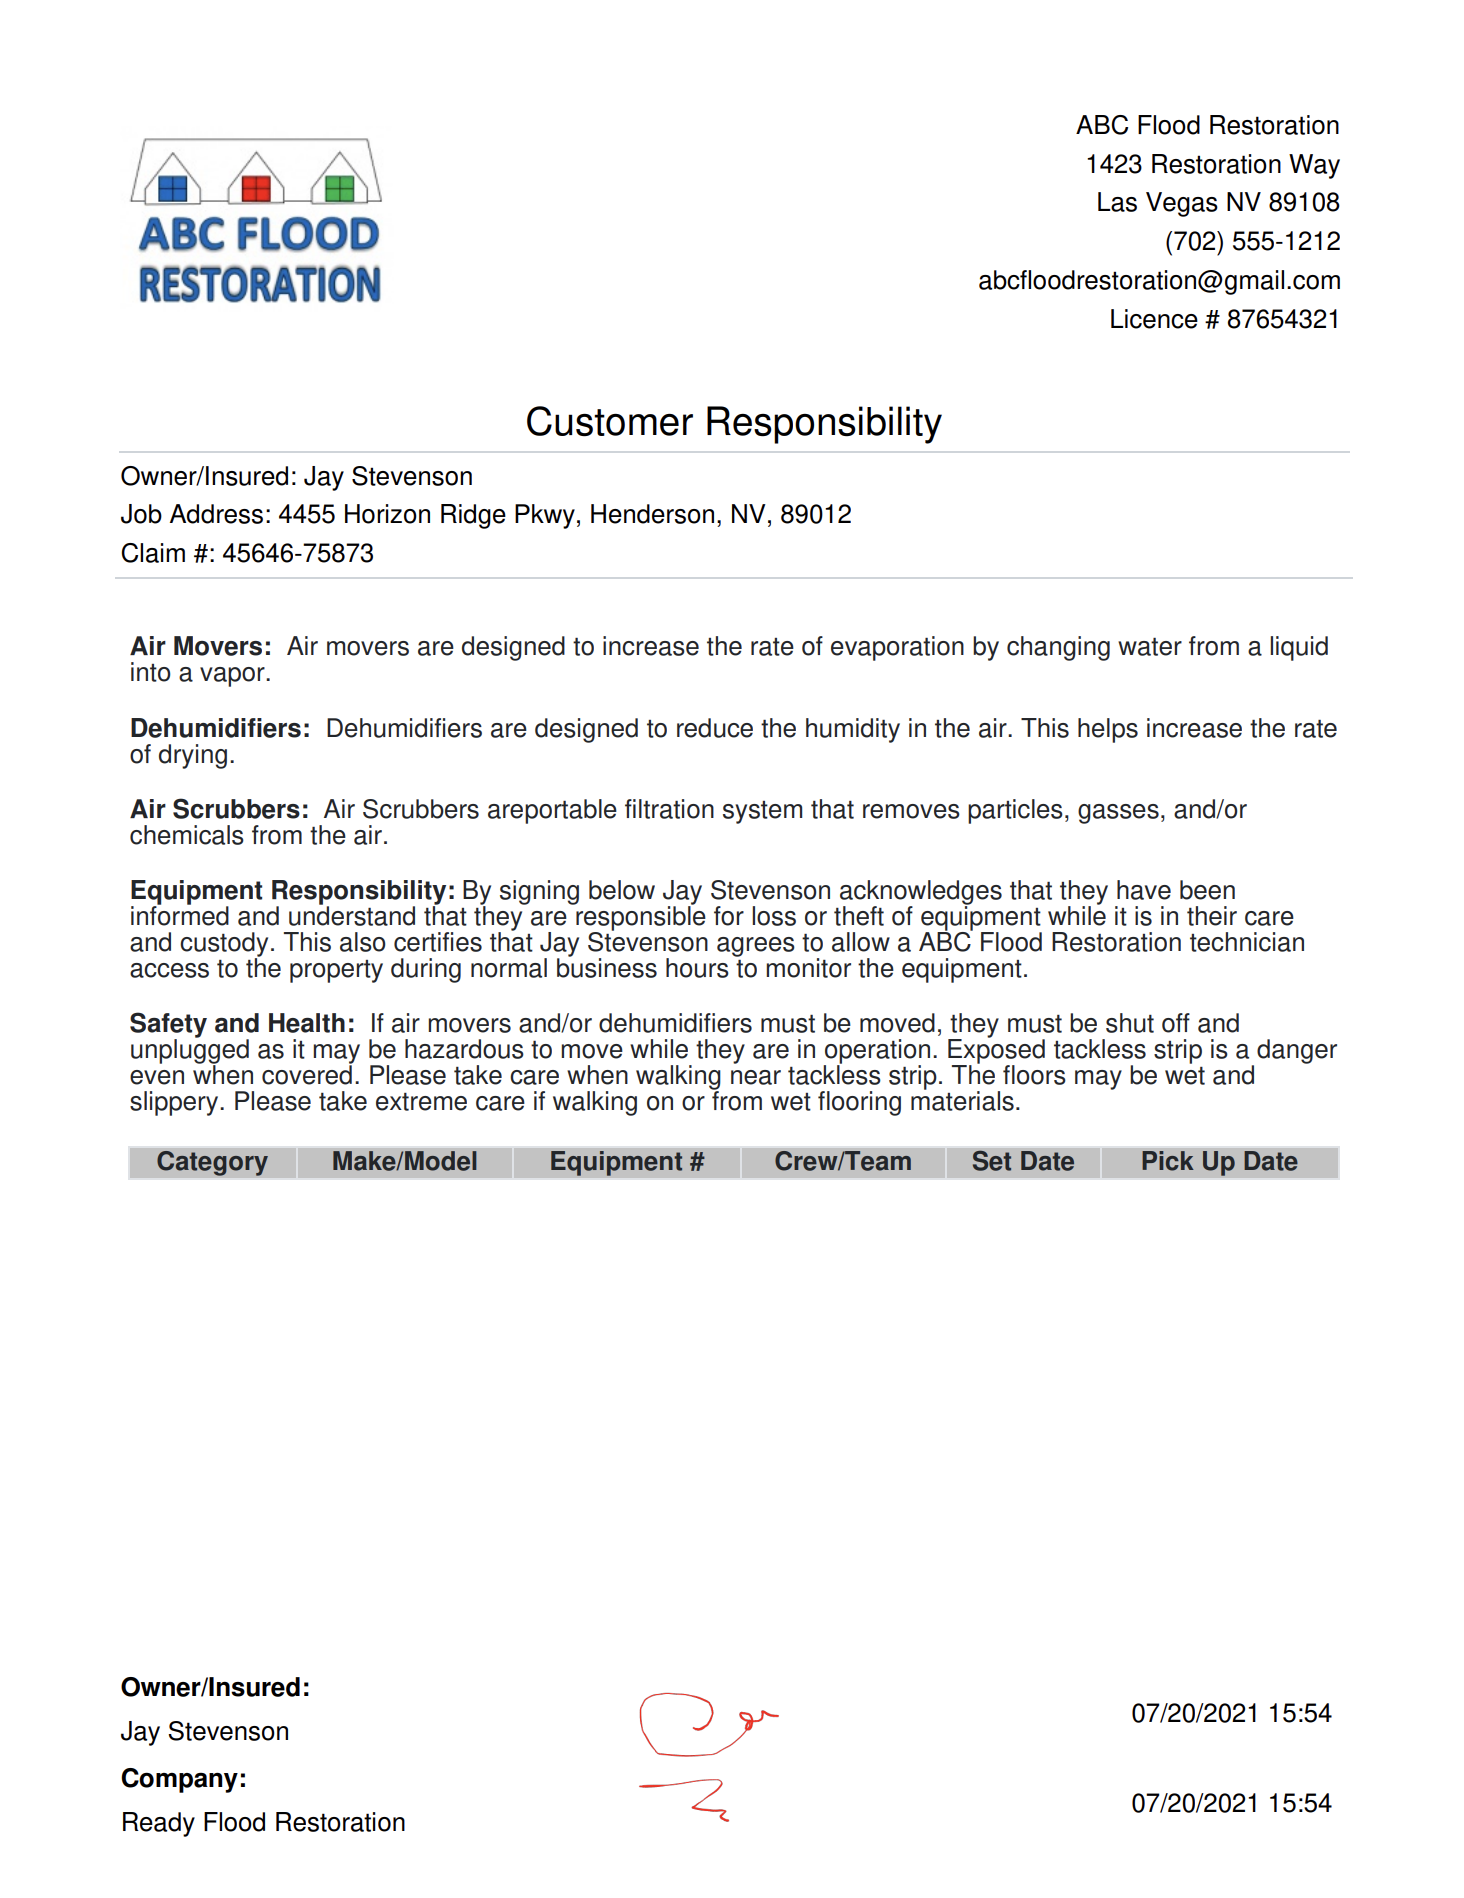 Customer Responsibility Forms